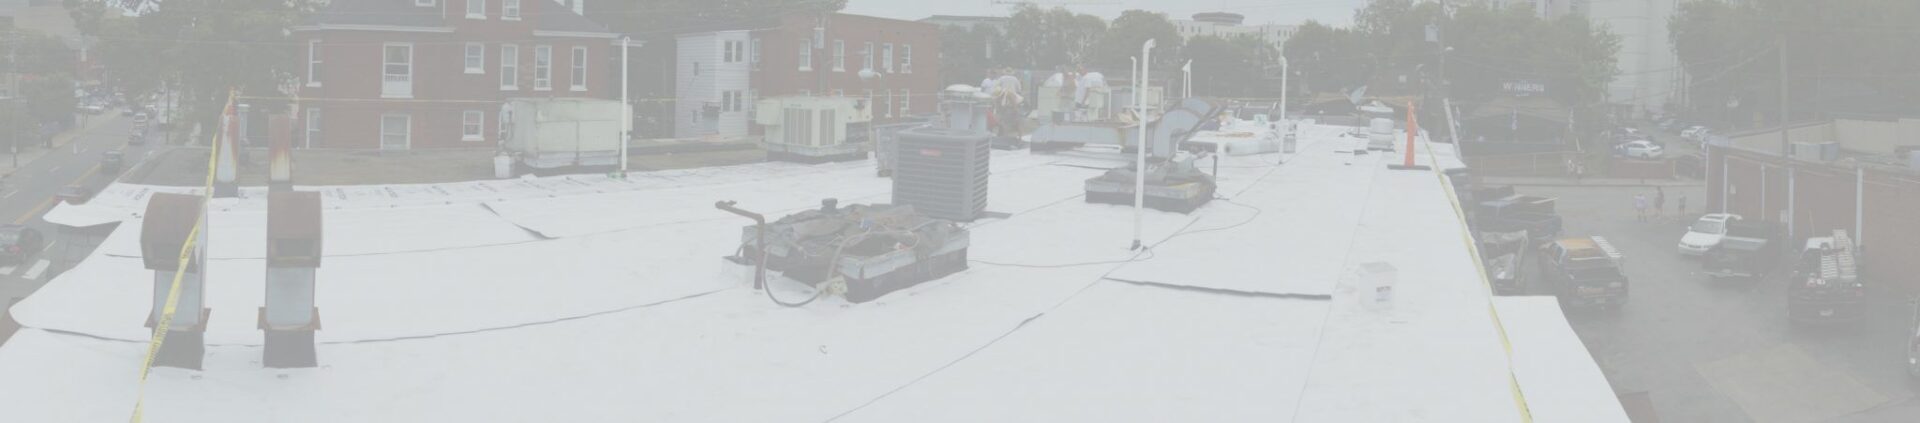 Commercial Roofing Contractor Nashville TN Flat Roof